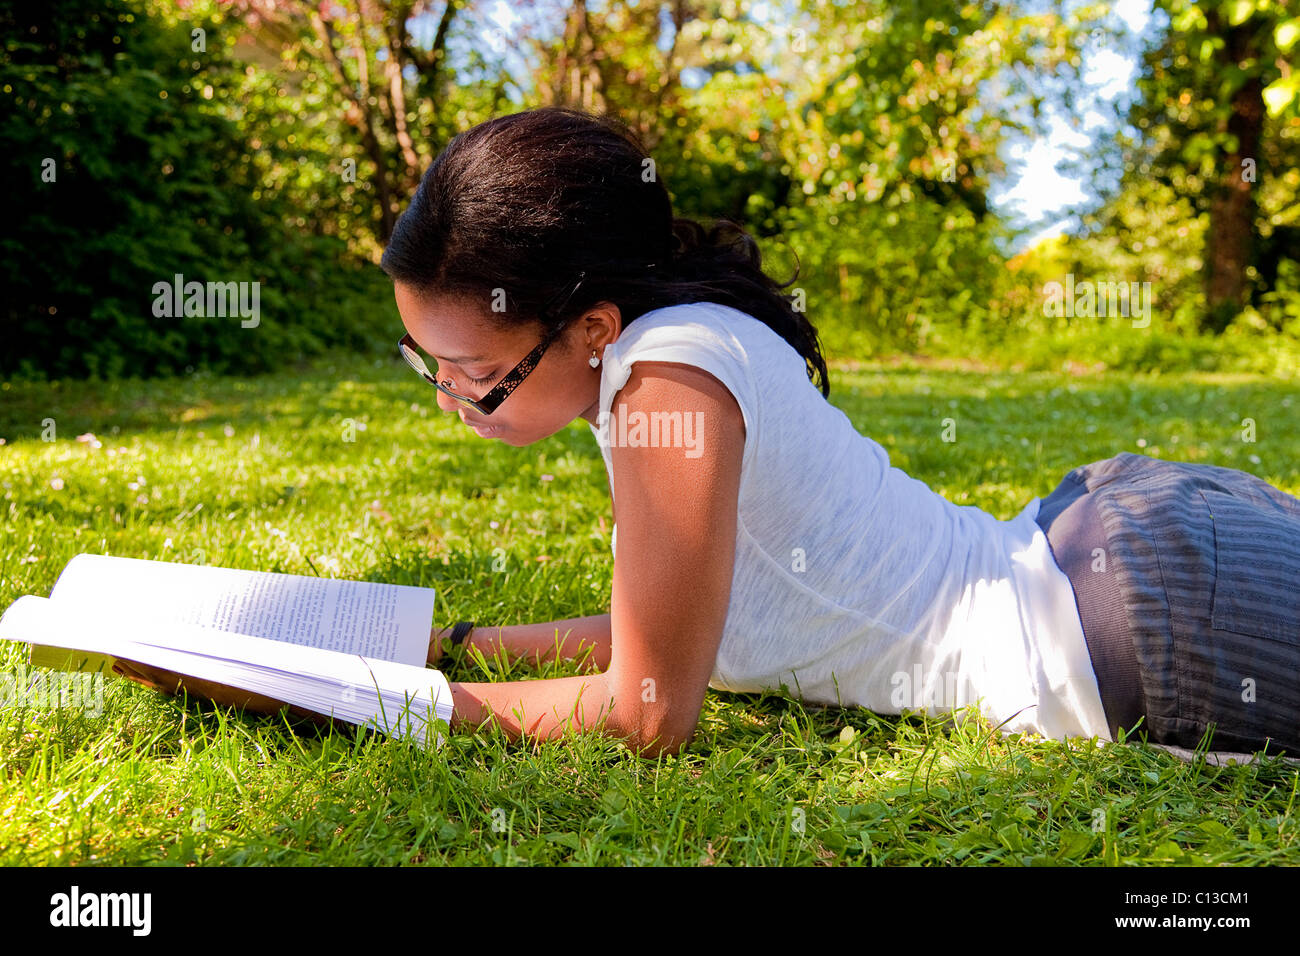 Young Student reading books at the school park Stock Photo